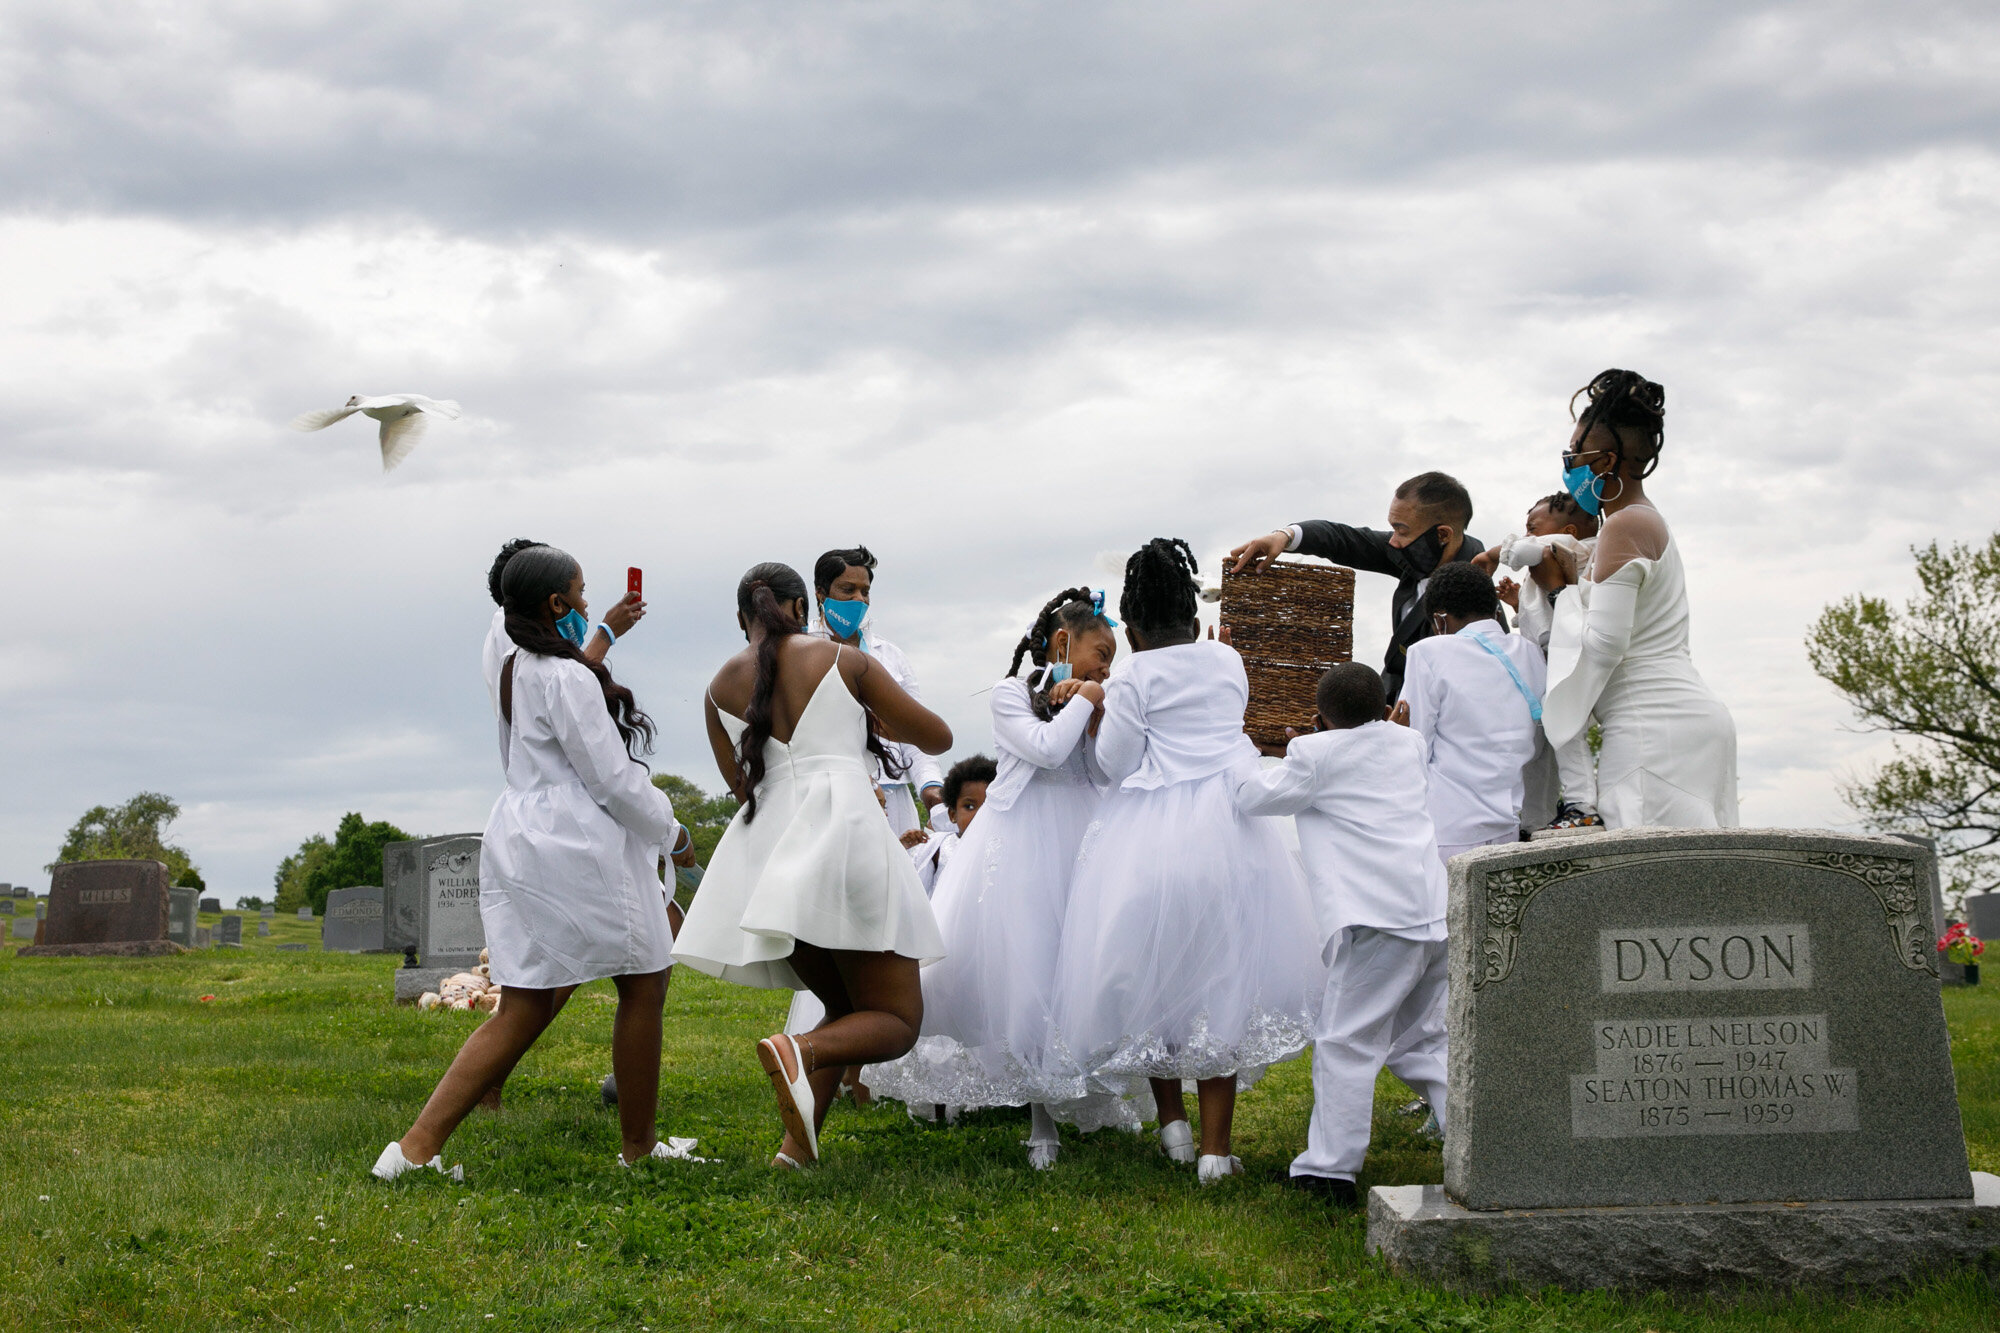  Grandchildren of Joanne Paylor, of southwest Washington, react to doves released during the interment ceremony for Paylor at Lincoln Memorial Cemetery in Suitland-Silver Hill, Md. on May 3, 2020. Although Paylor did not die from the coronavirus, alm